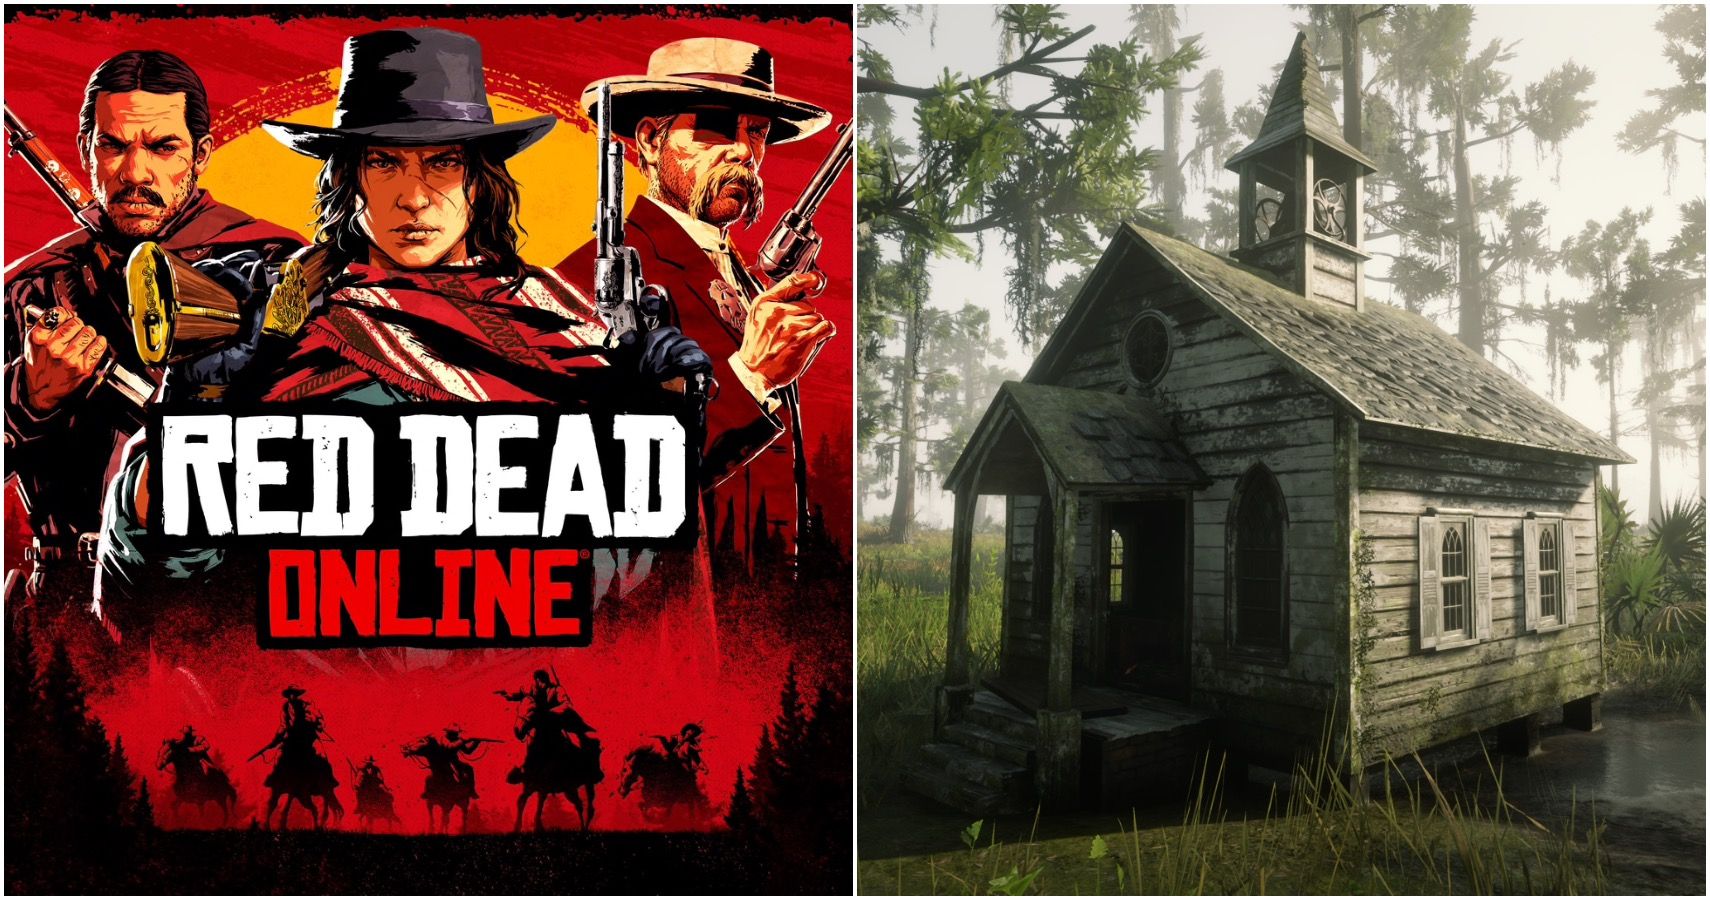 The logo for Red Dead Online and a tiny church